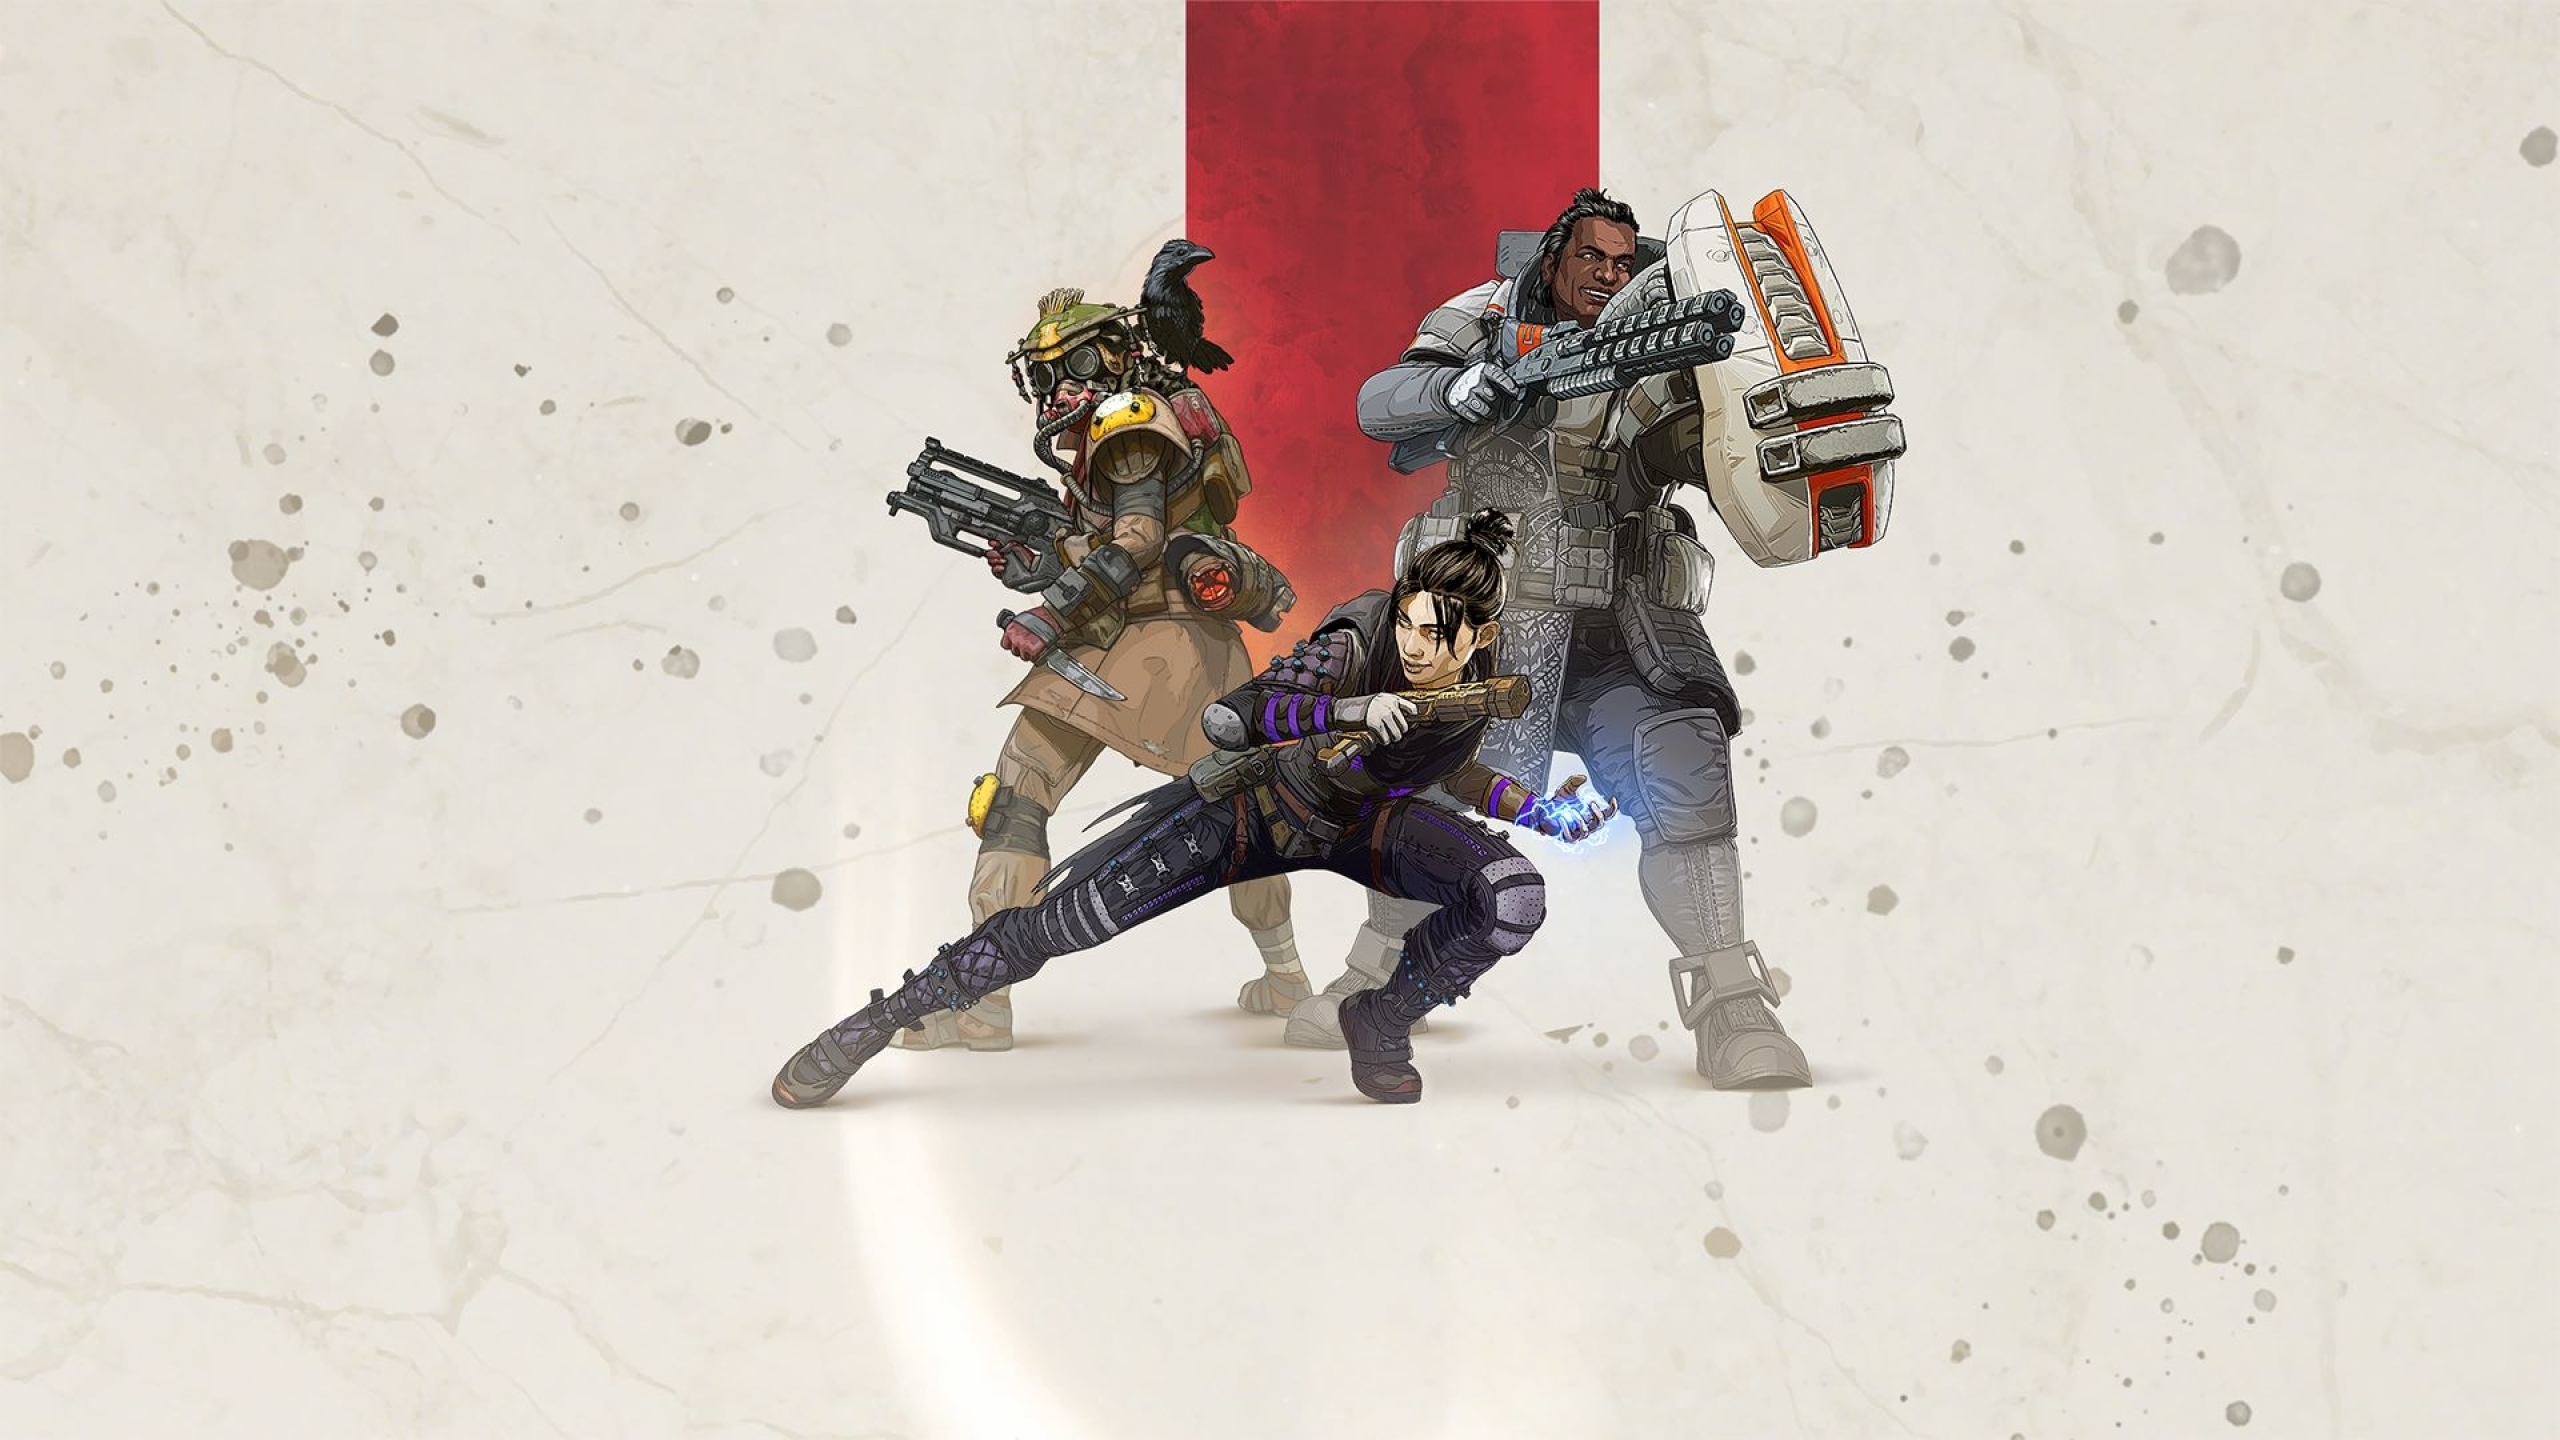 2560x1440 Apex Legends 1440p Resolution Wallpaper Hd Games 4k Wallpapers Images Photos And Background